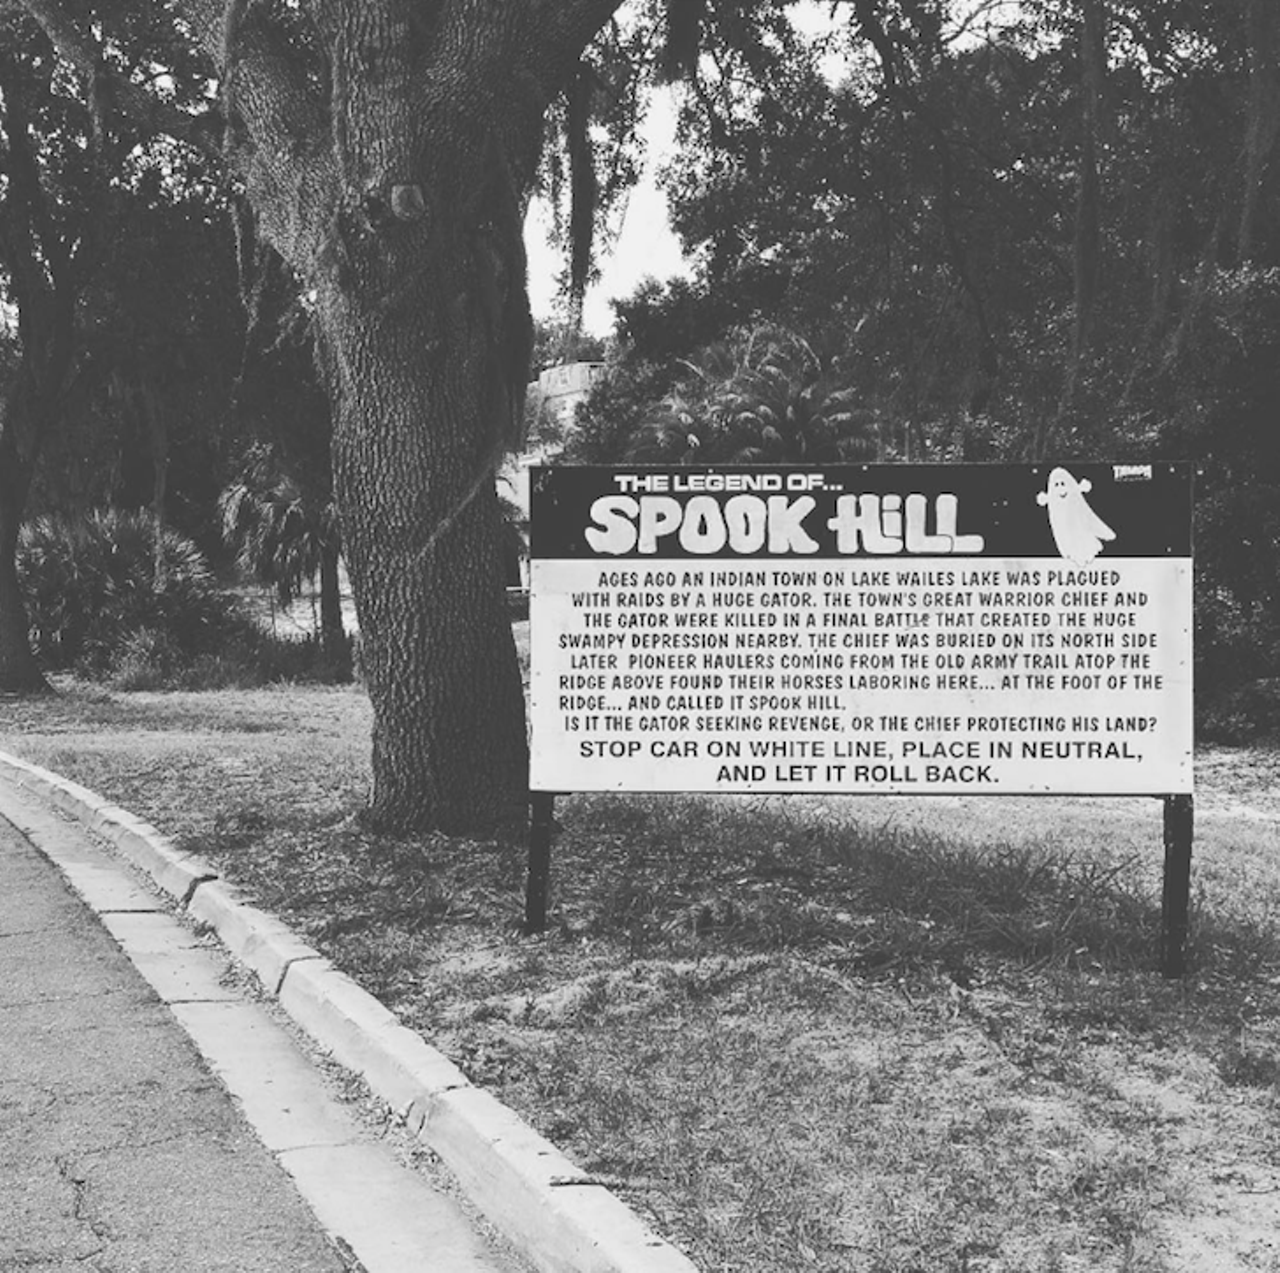 Spook Hill
Lake Wales
Many legends surround the optical illusion of this "gravity hill," including the locally promoted folklore that it&#146;s a gator trying to protect its land. The hidden horizon makes it seem as if your car is rolling backwards uphill if you put it in neutral. It&#146;s an interesting experience, and the nearby elementary school has adopted Casper the Friendly Ghost as its mascot, following the popularity of the "Spook Hill" nickname.
Photo via clarkoor/Instagram